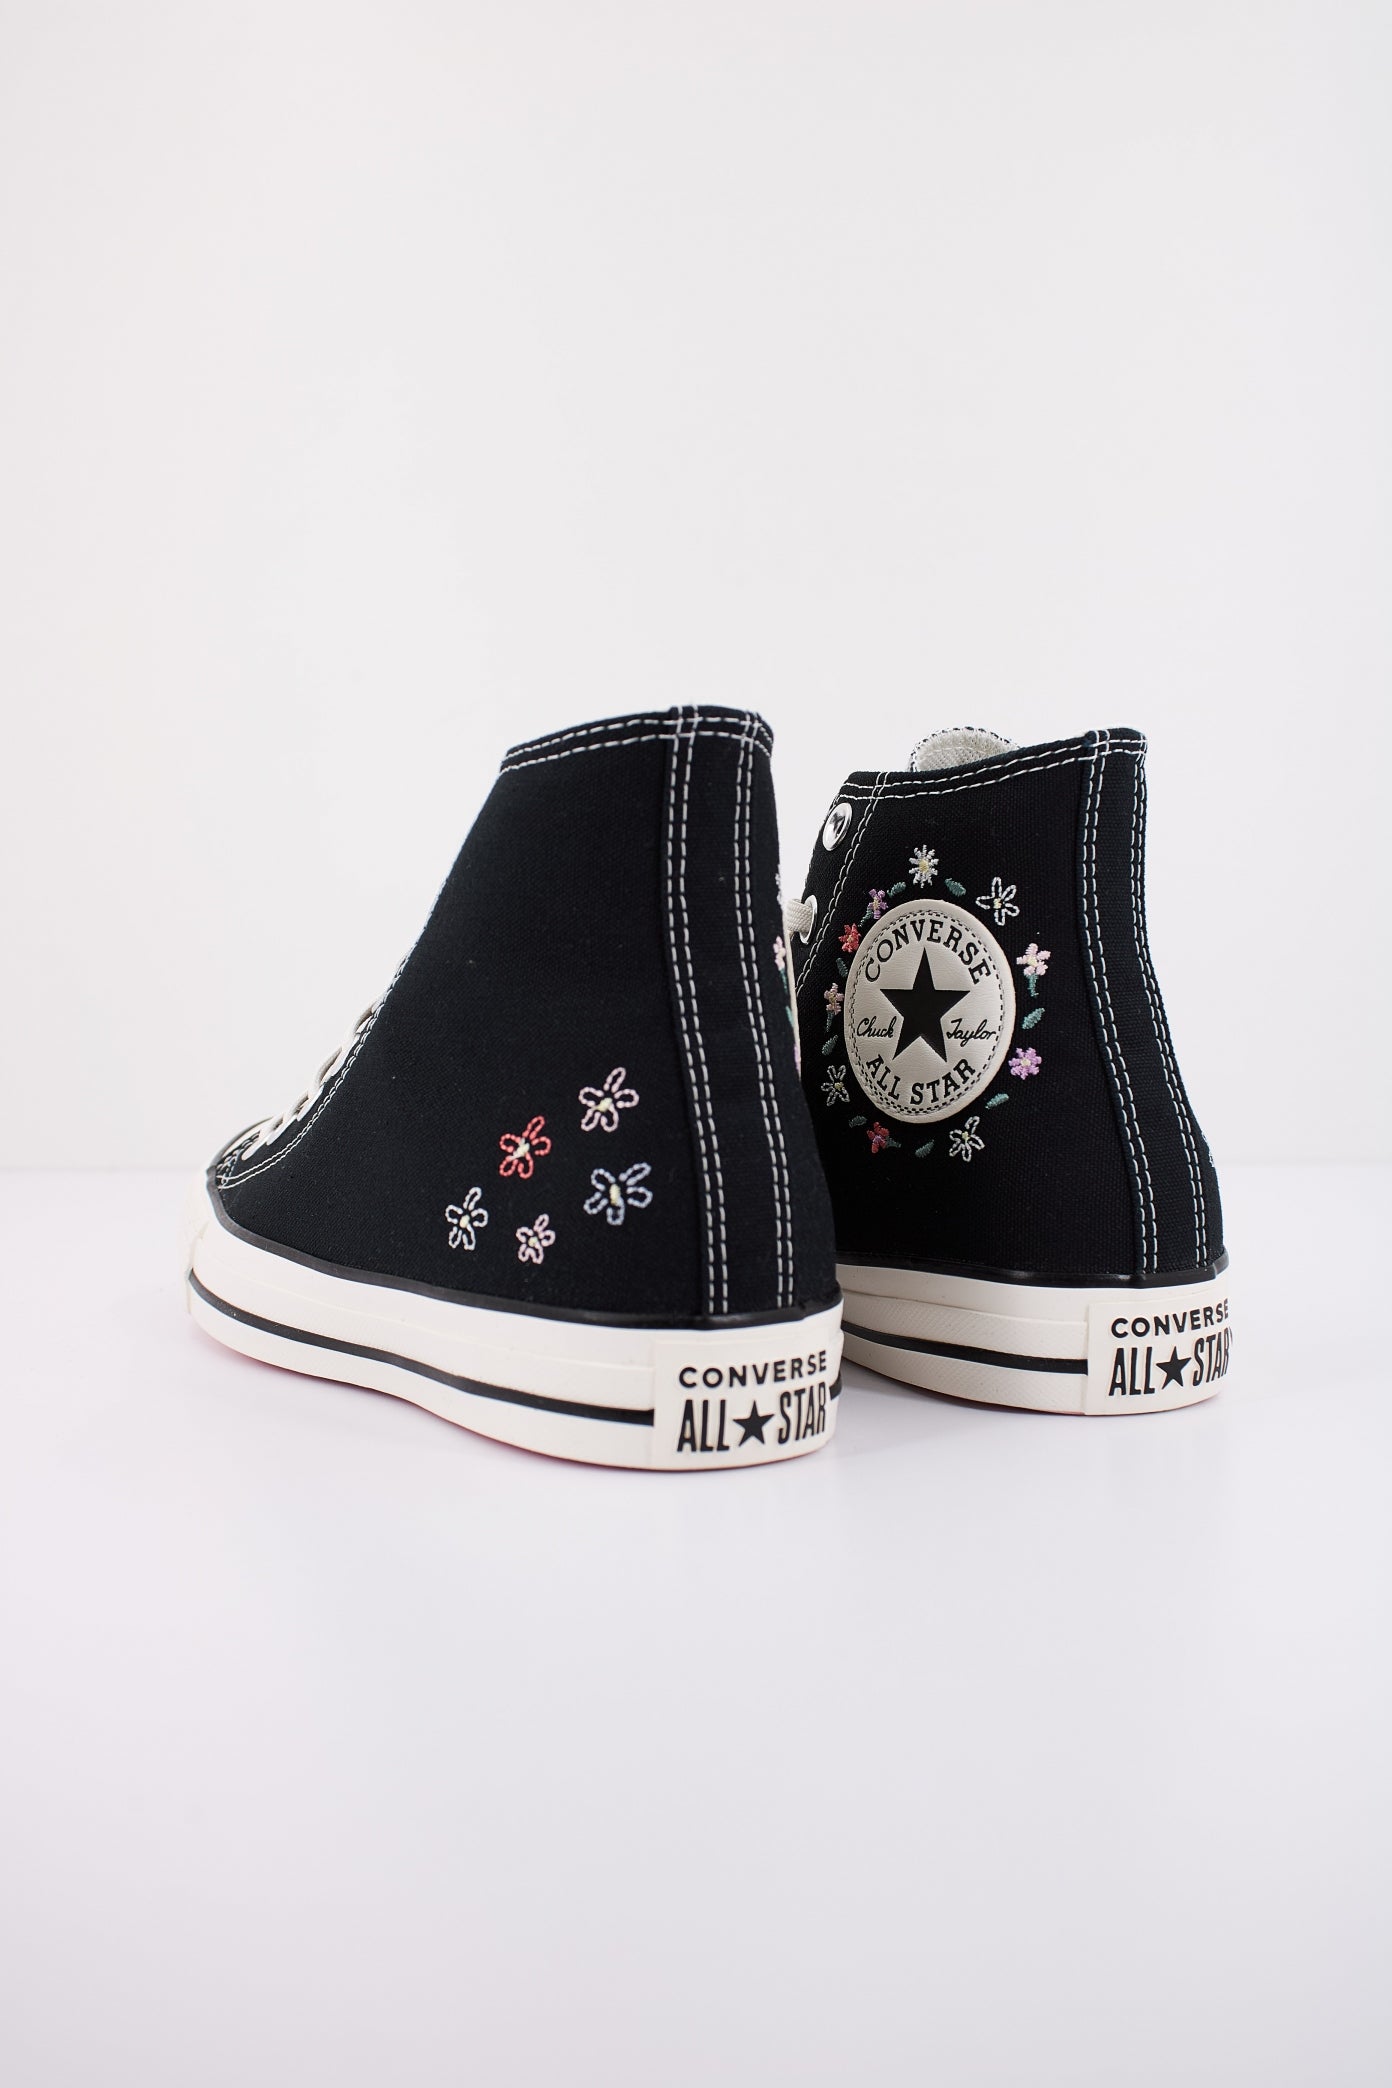 CONVERSE  CHUCK TAYLOR ALL STAR EMBROIDERED LITTLE FLOWERS en color NEGRO  (4)